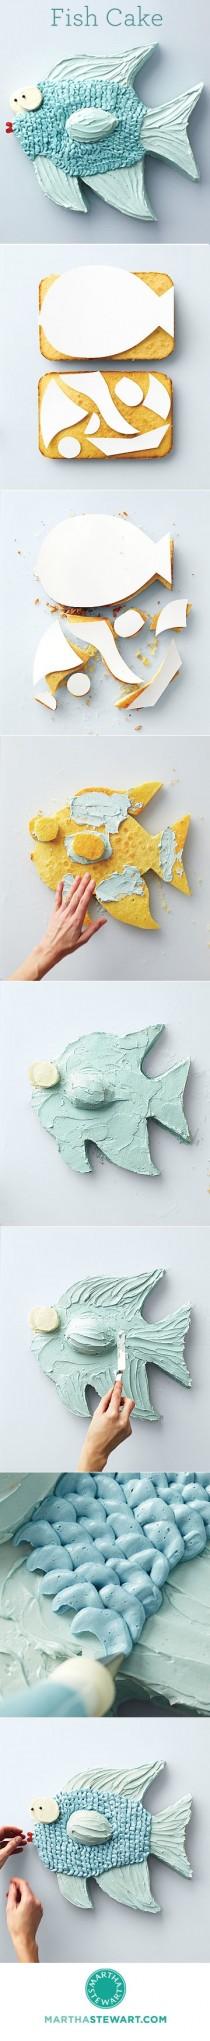 wedding photo - how to make a turquoise fish cake?